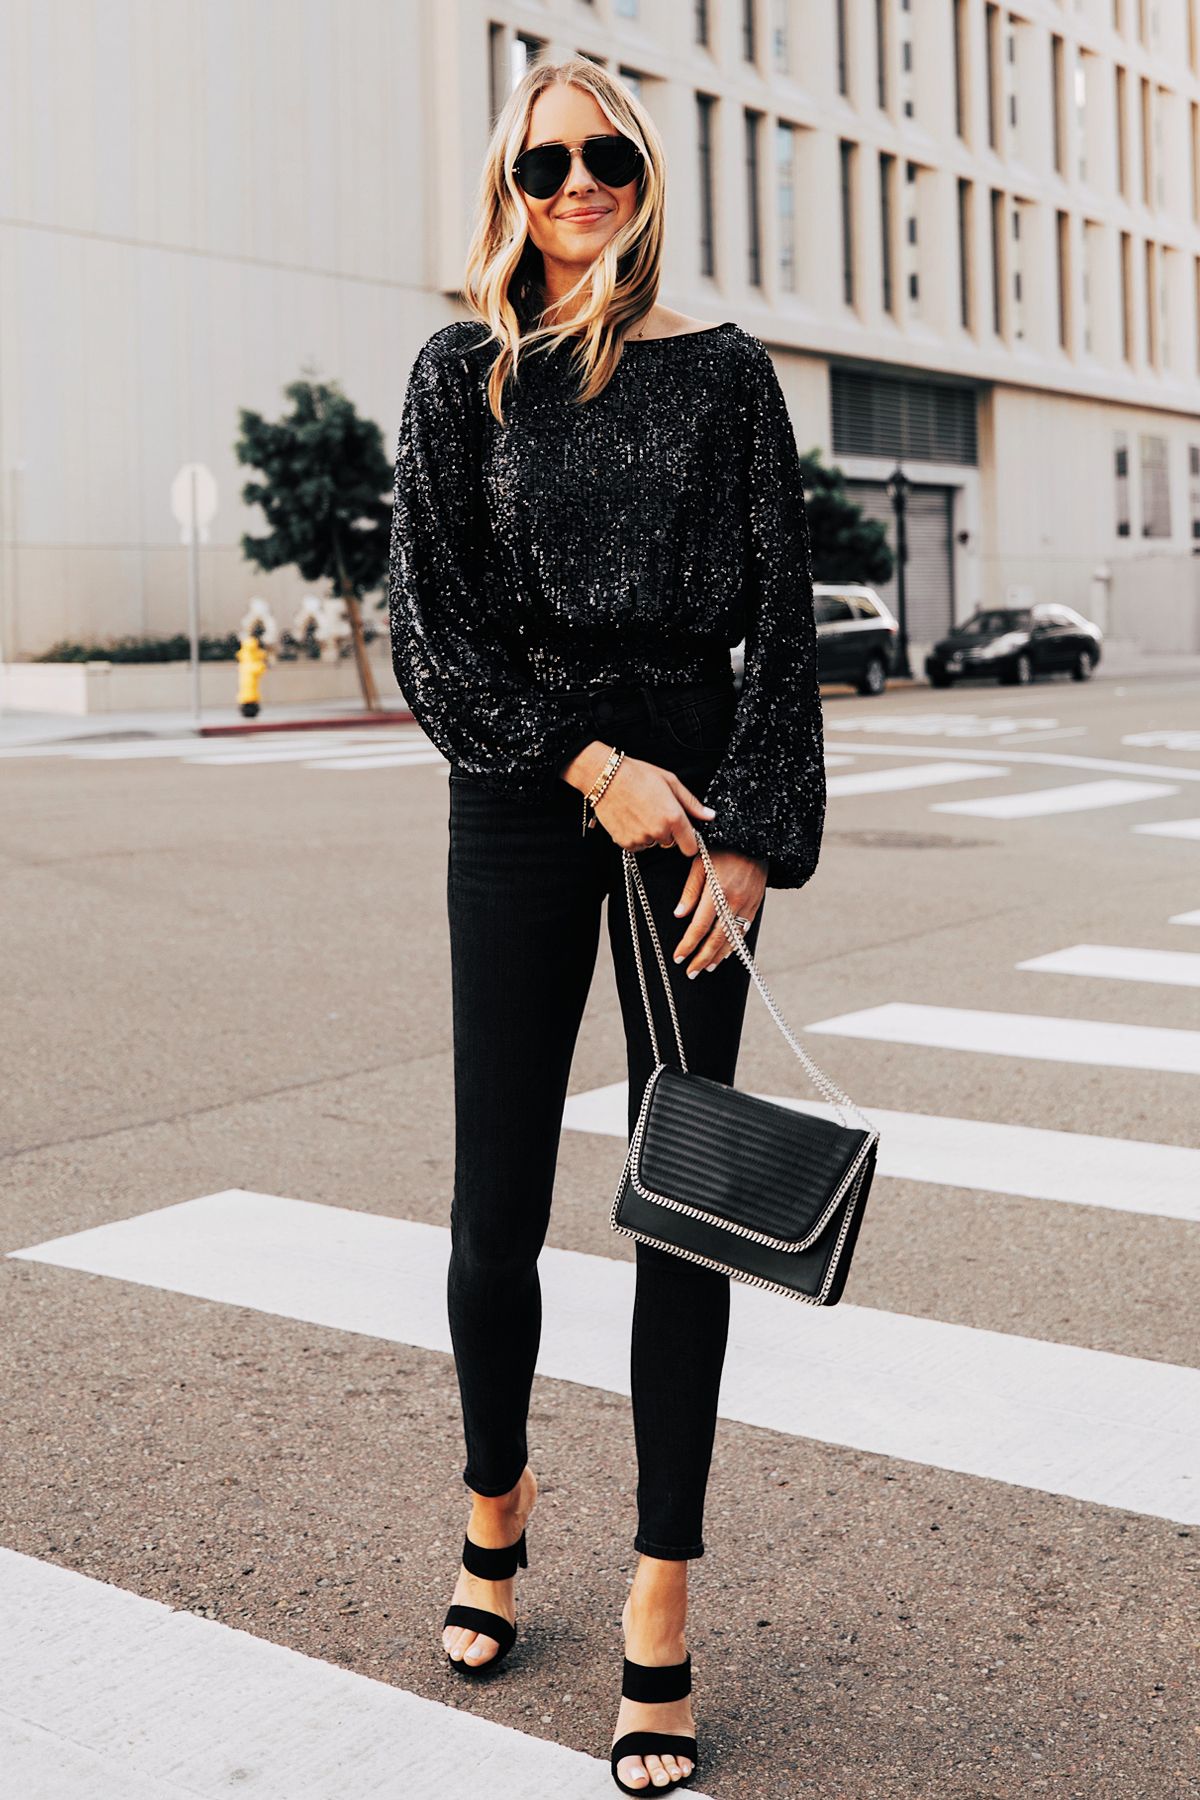 How to Style a Black Sequin Top for Any
Occasion